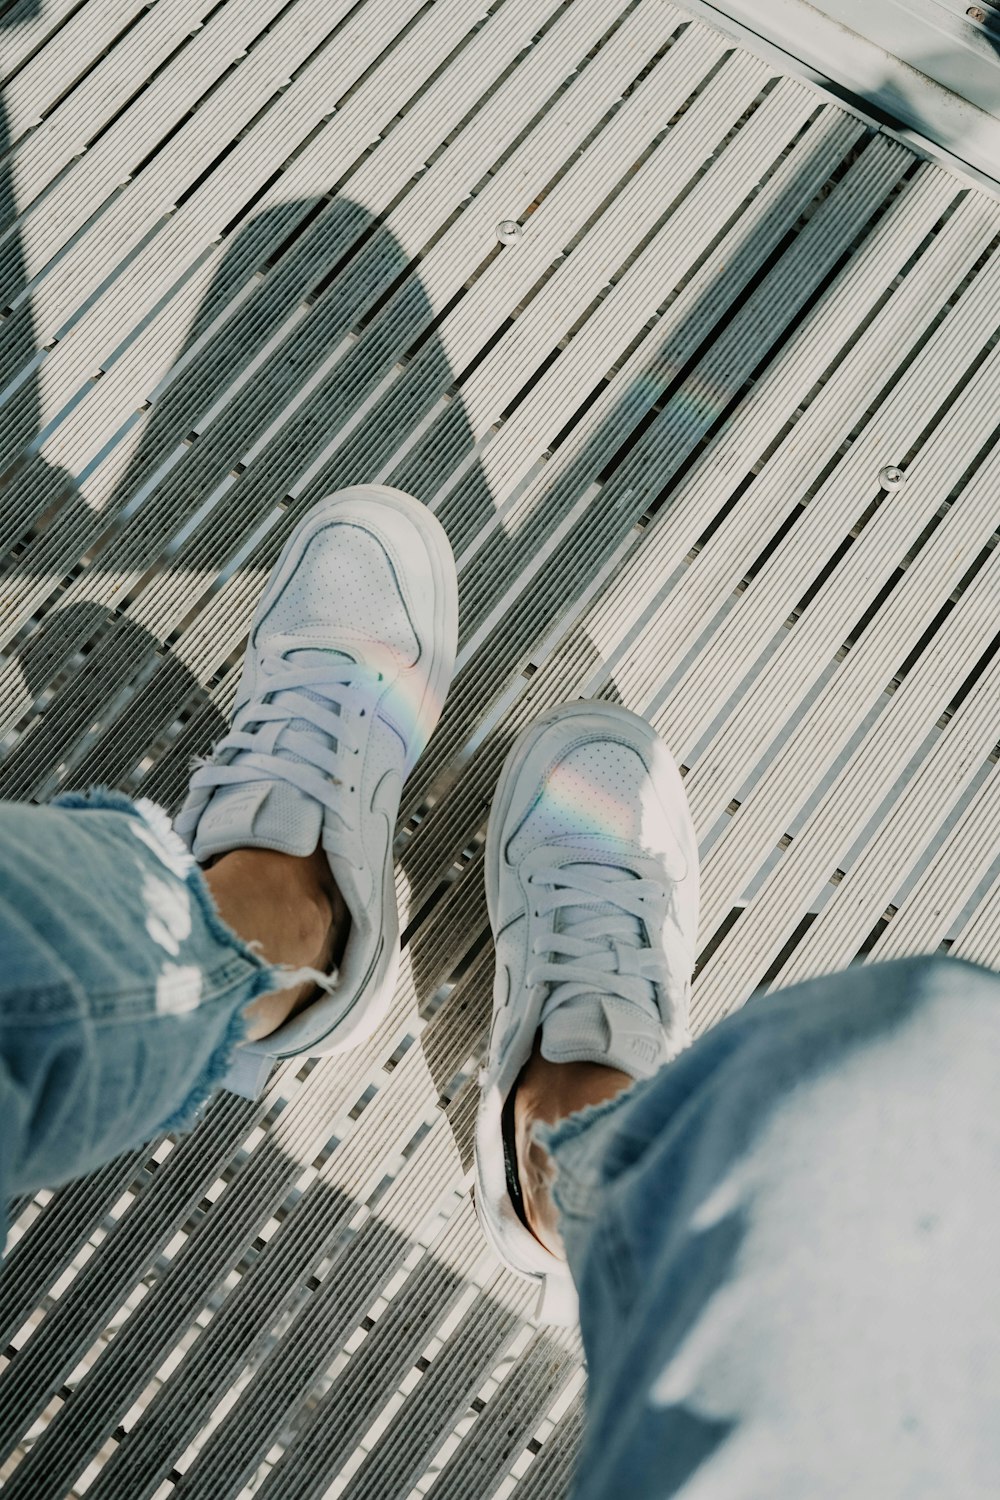 person in white sneakers